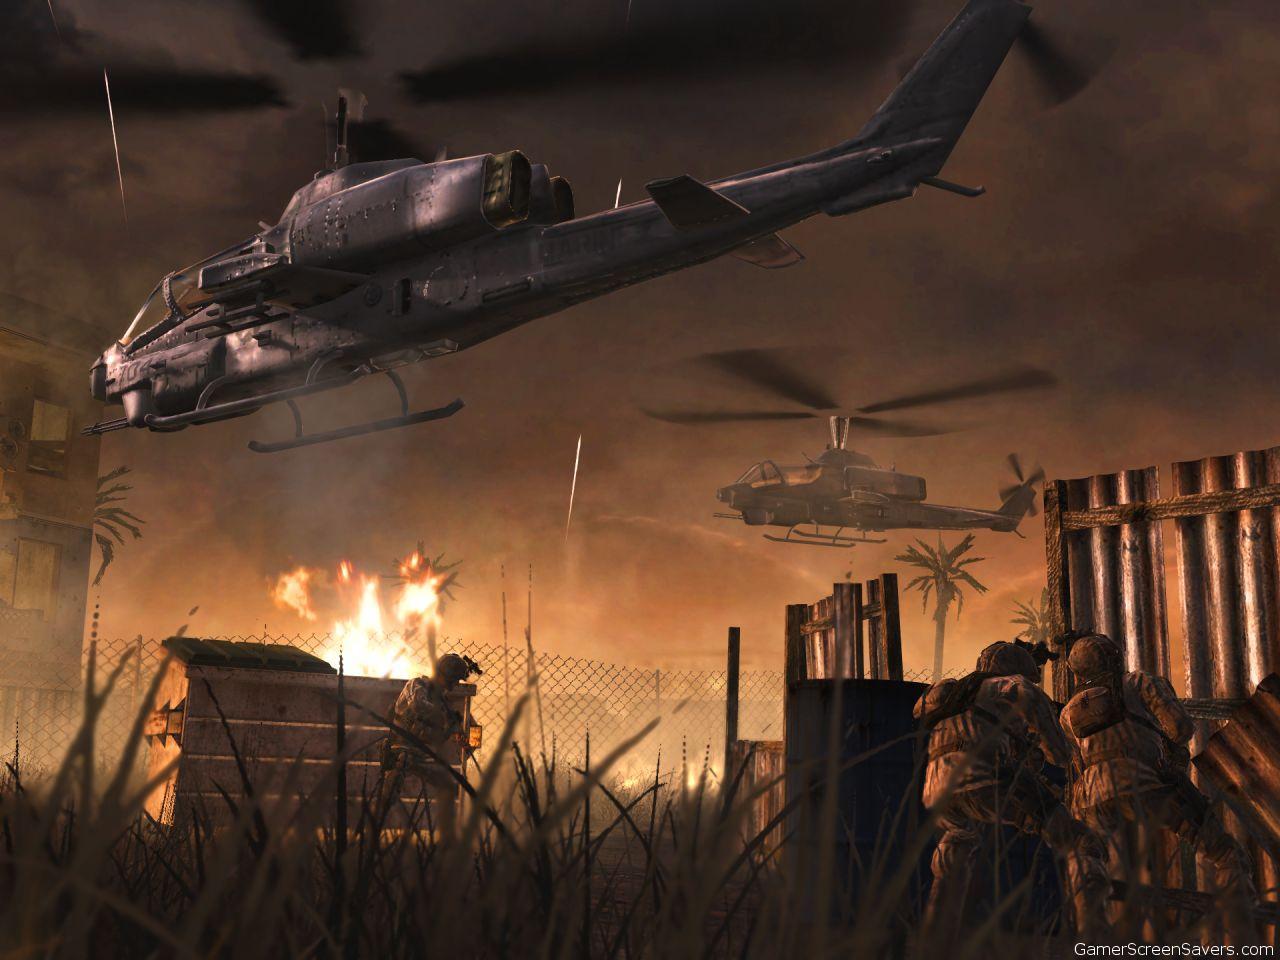 WallpapersKu Call of Duty 4 Wallpapers 1280x960